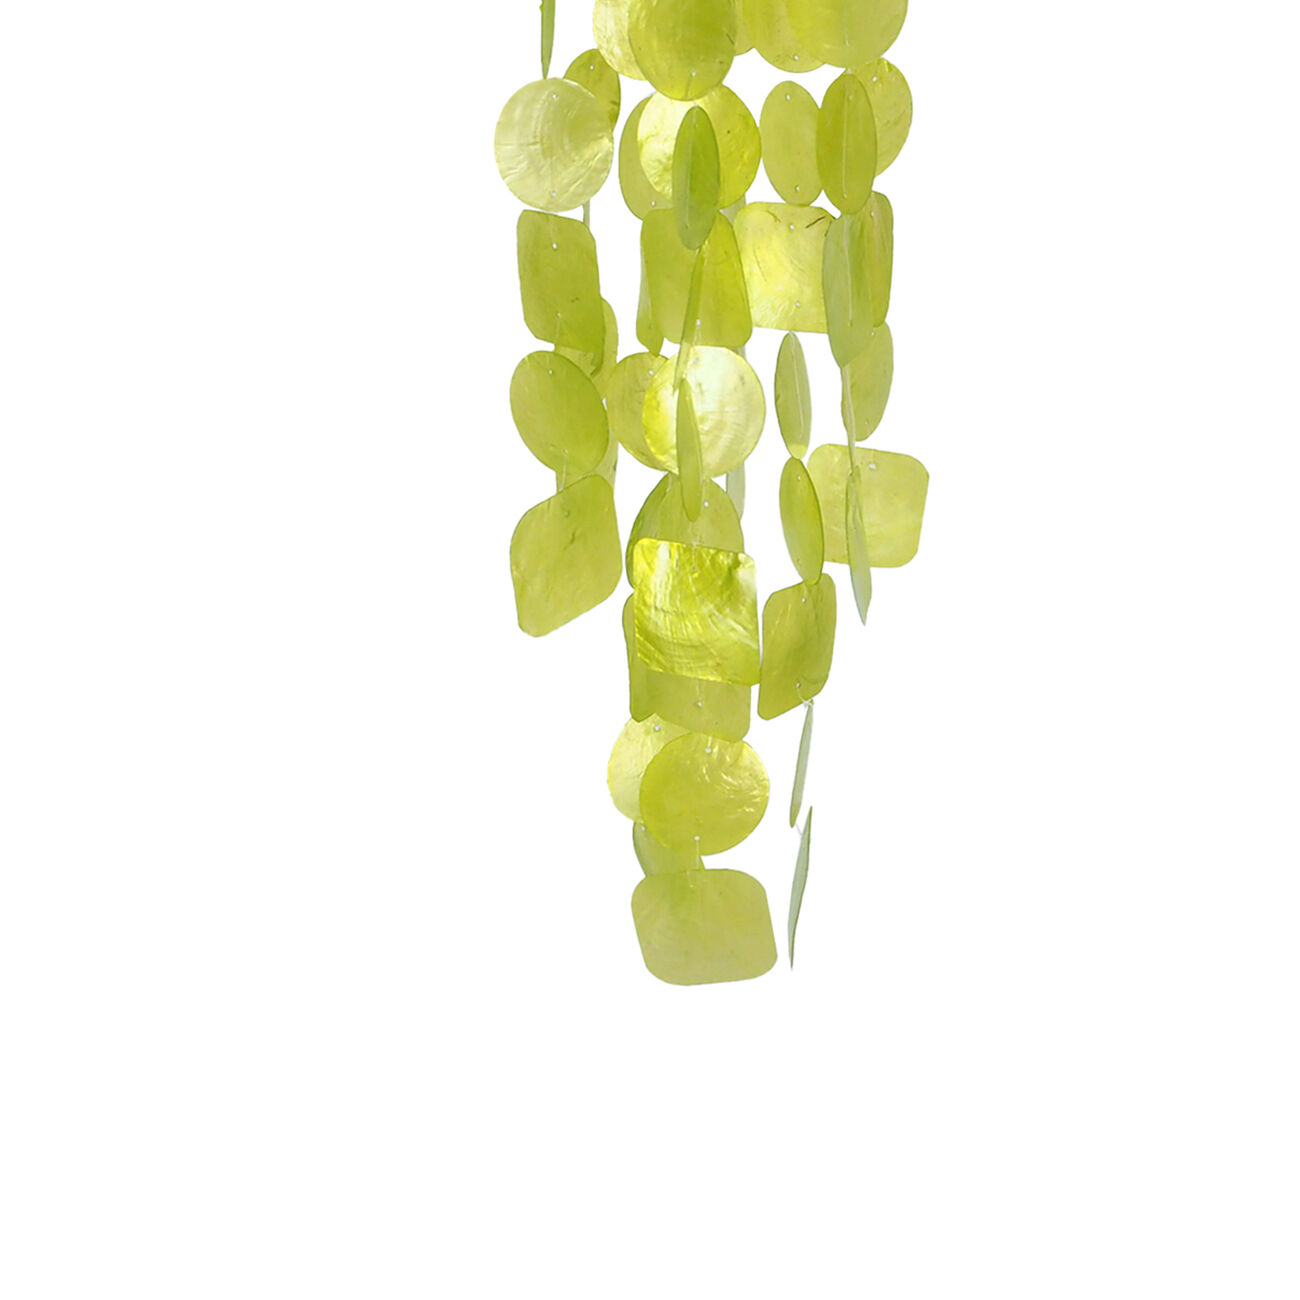 Aesthetically Designed Handmade Wind Chime with Capiz Shell Hangings, Green